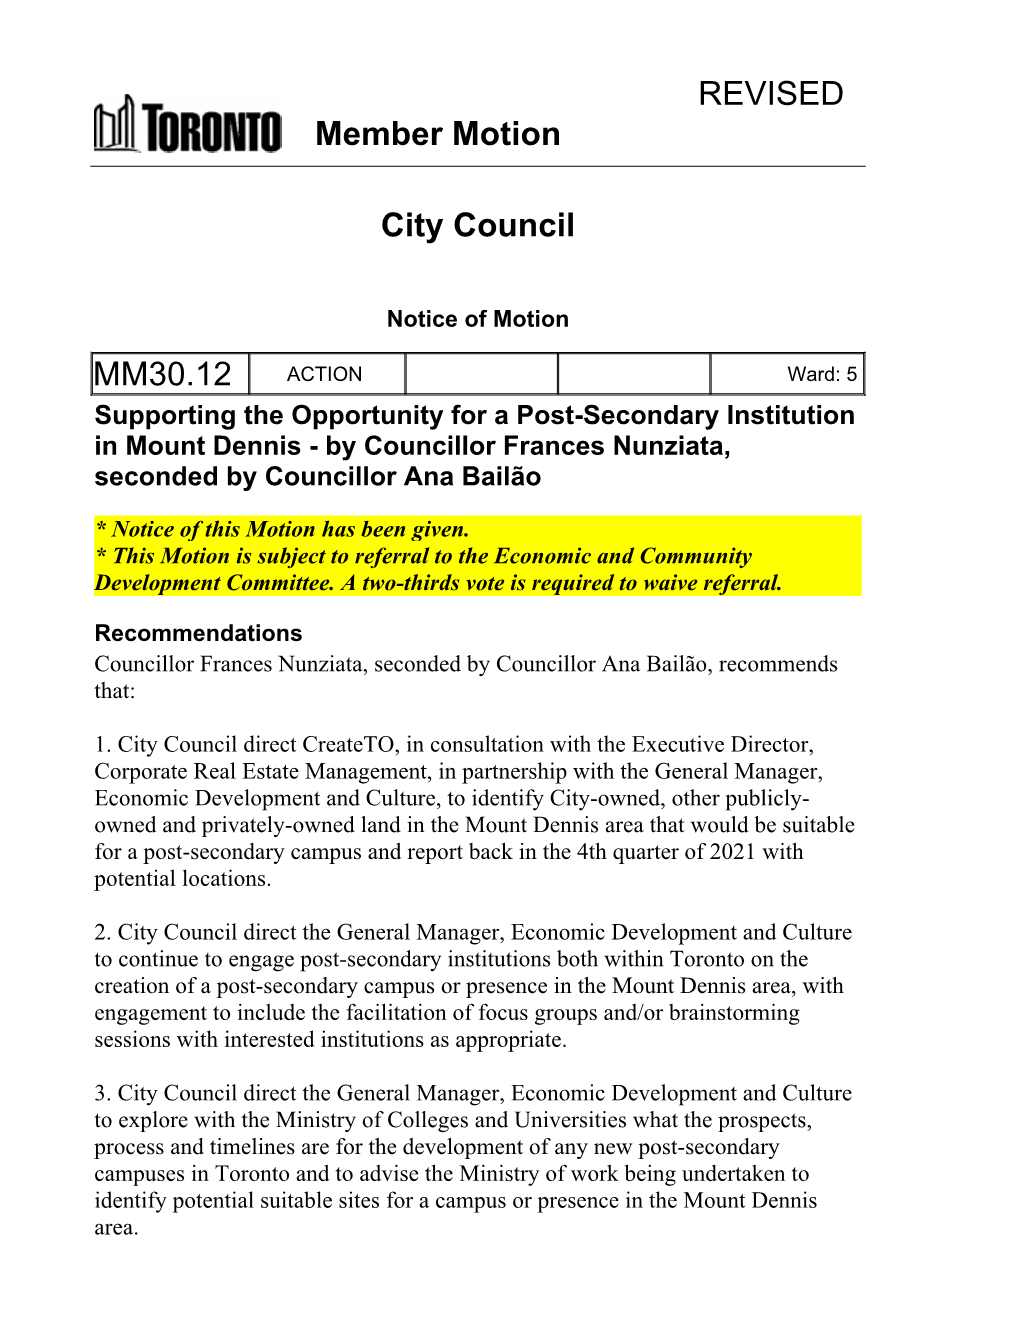 Member Motion City Council MM30.12 REVISED